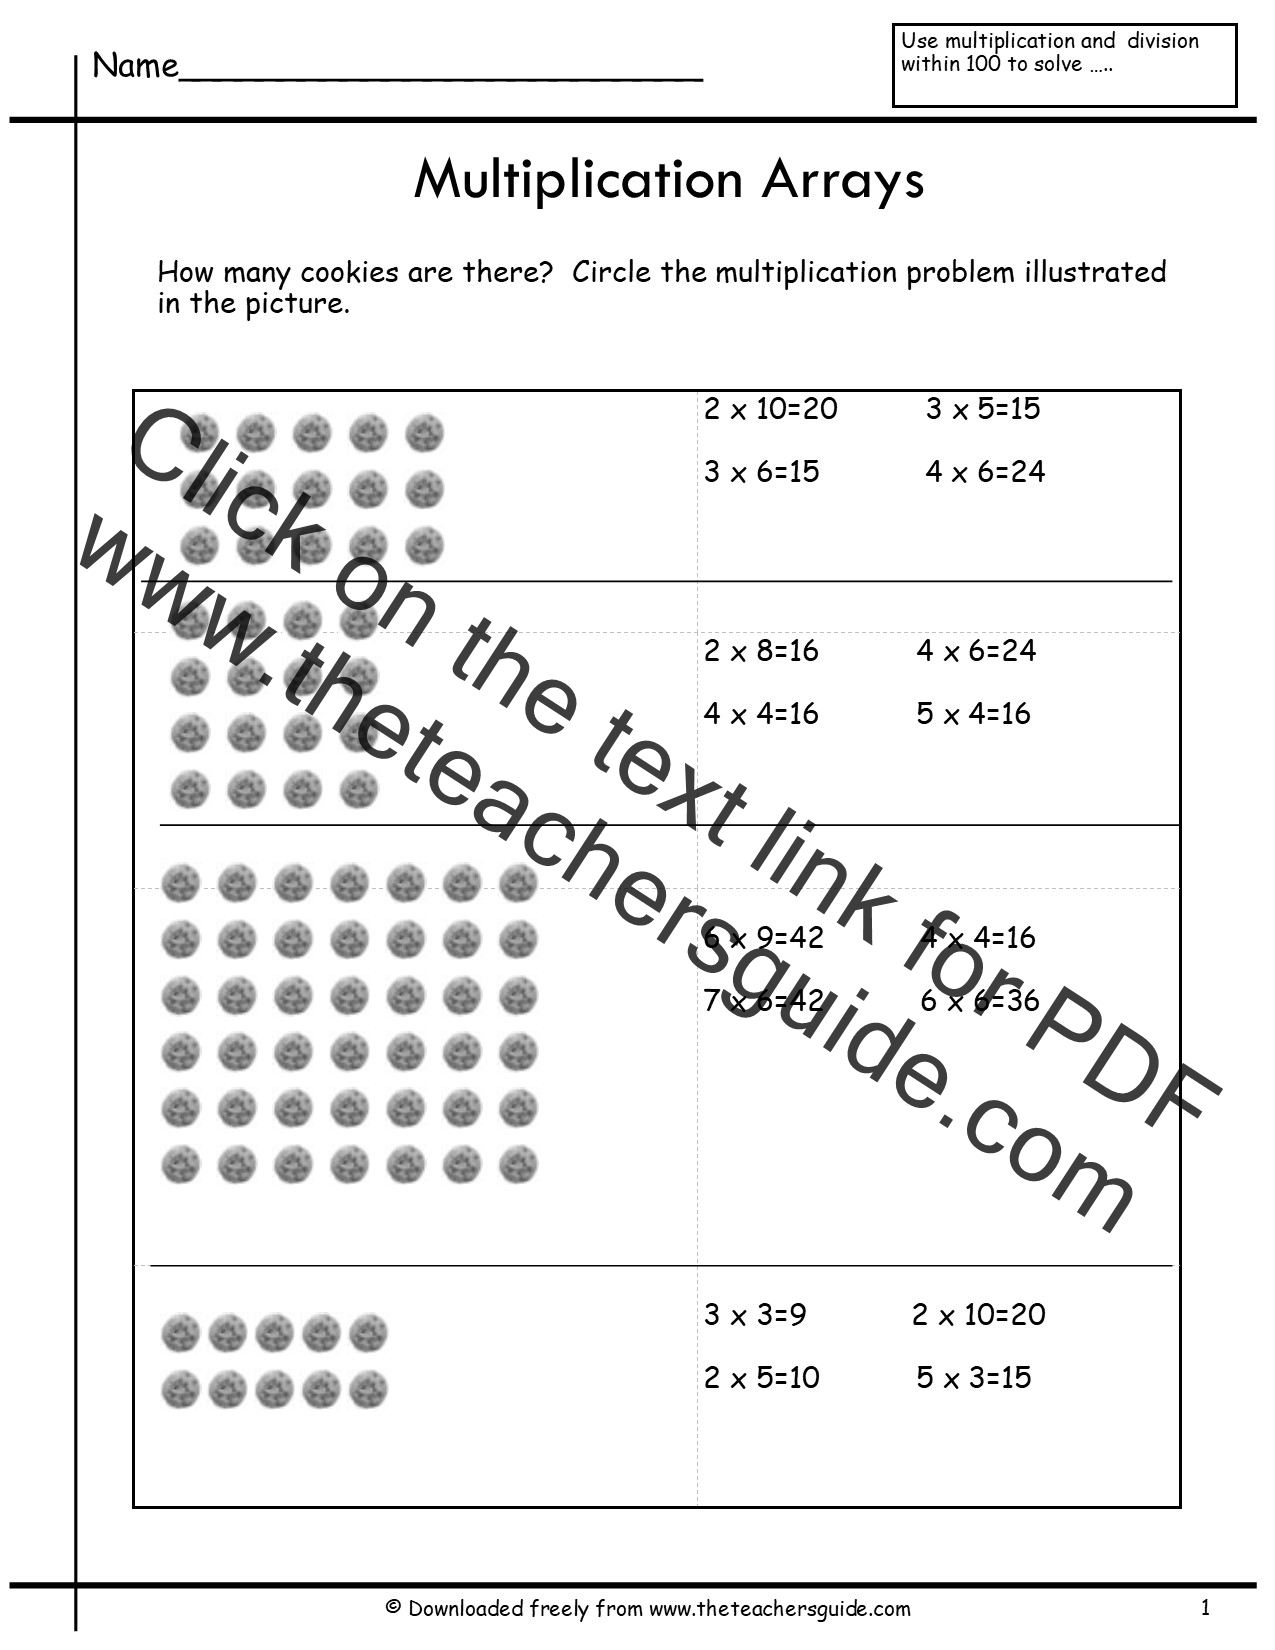  Multiplication Array Worksheets From The Teacher s Guide